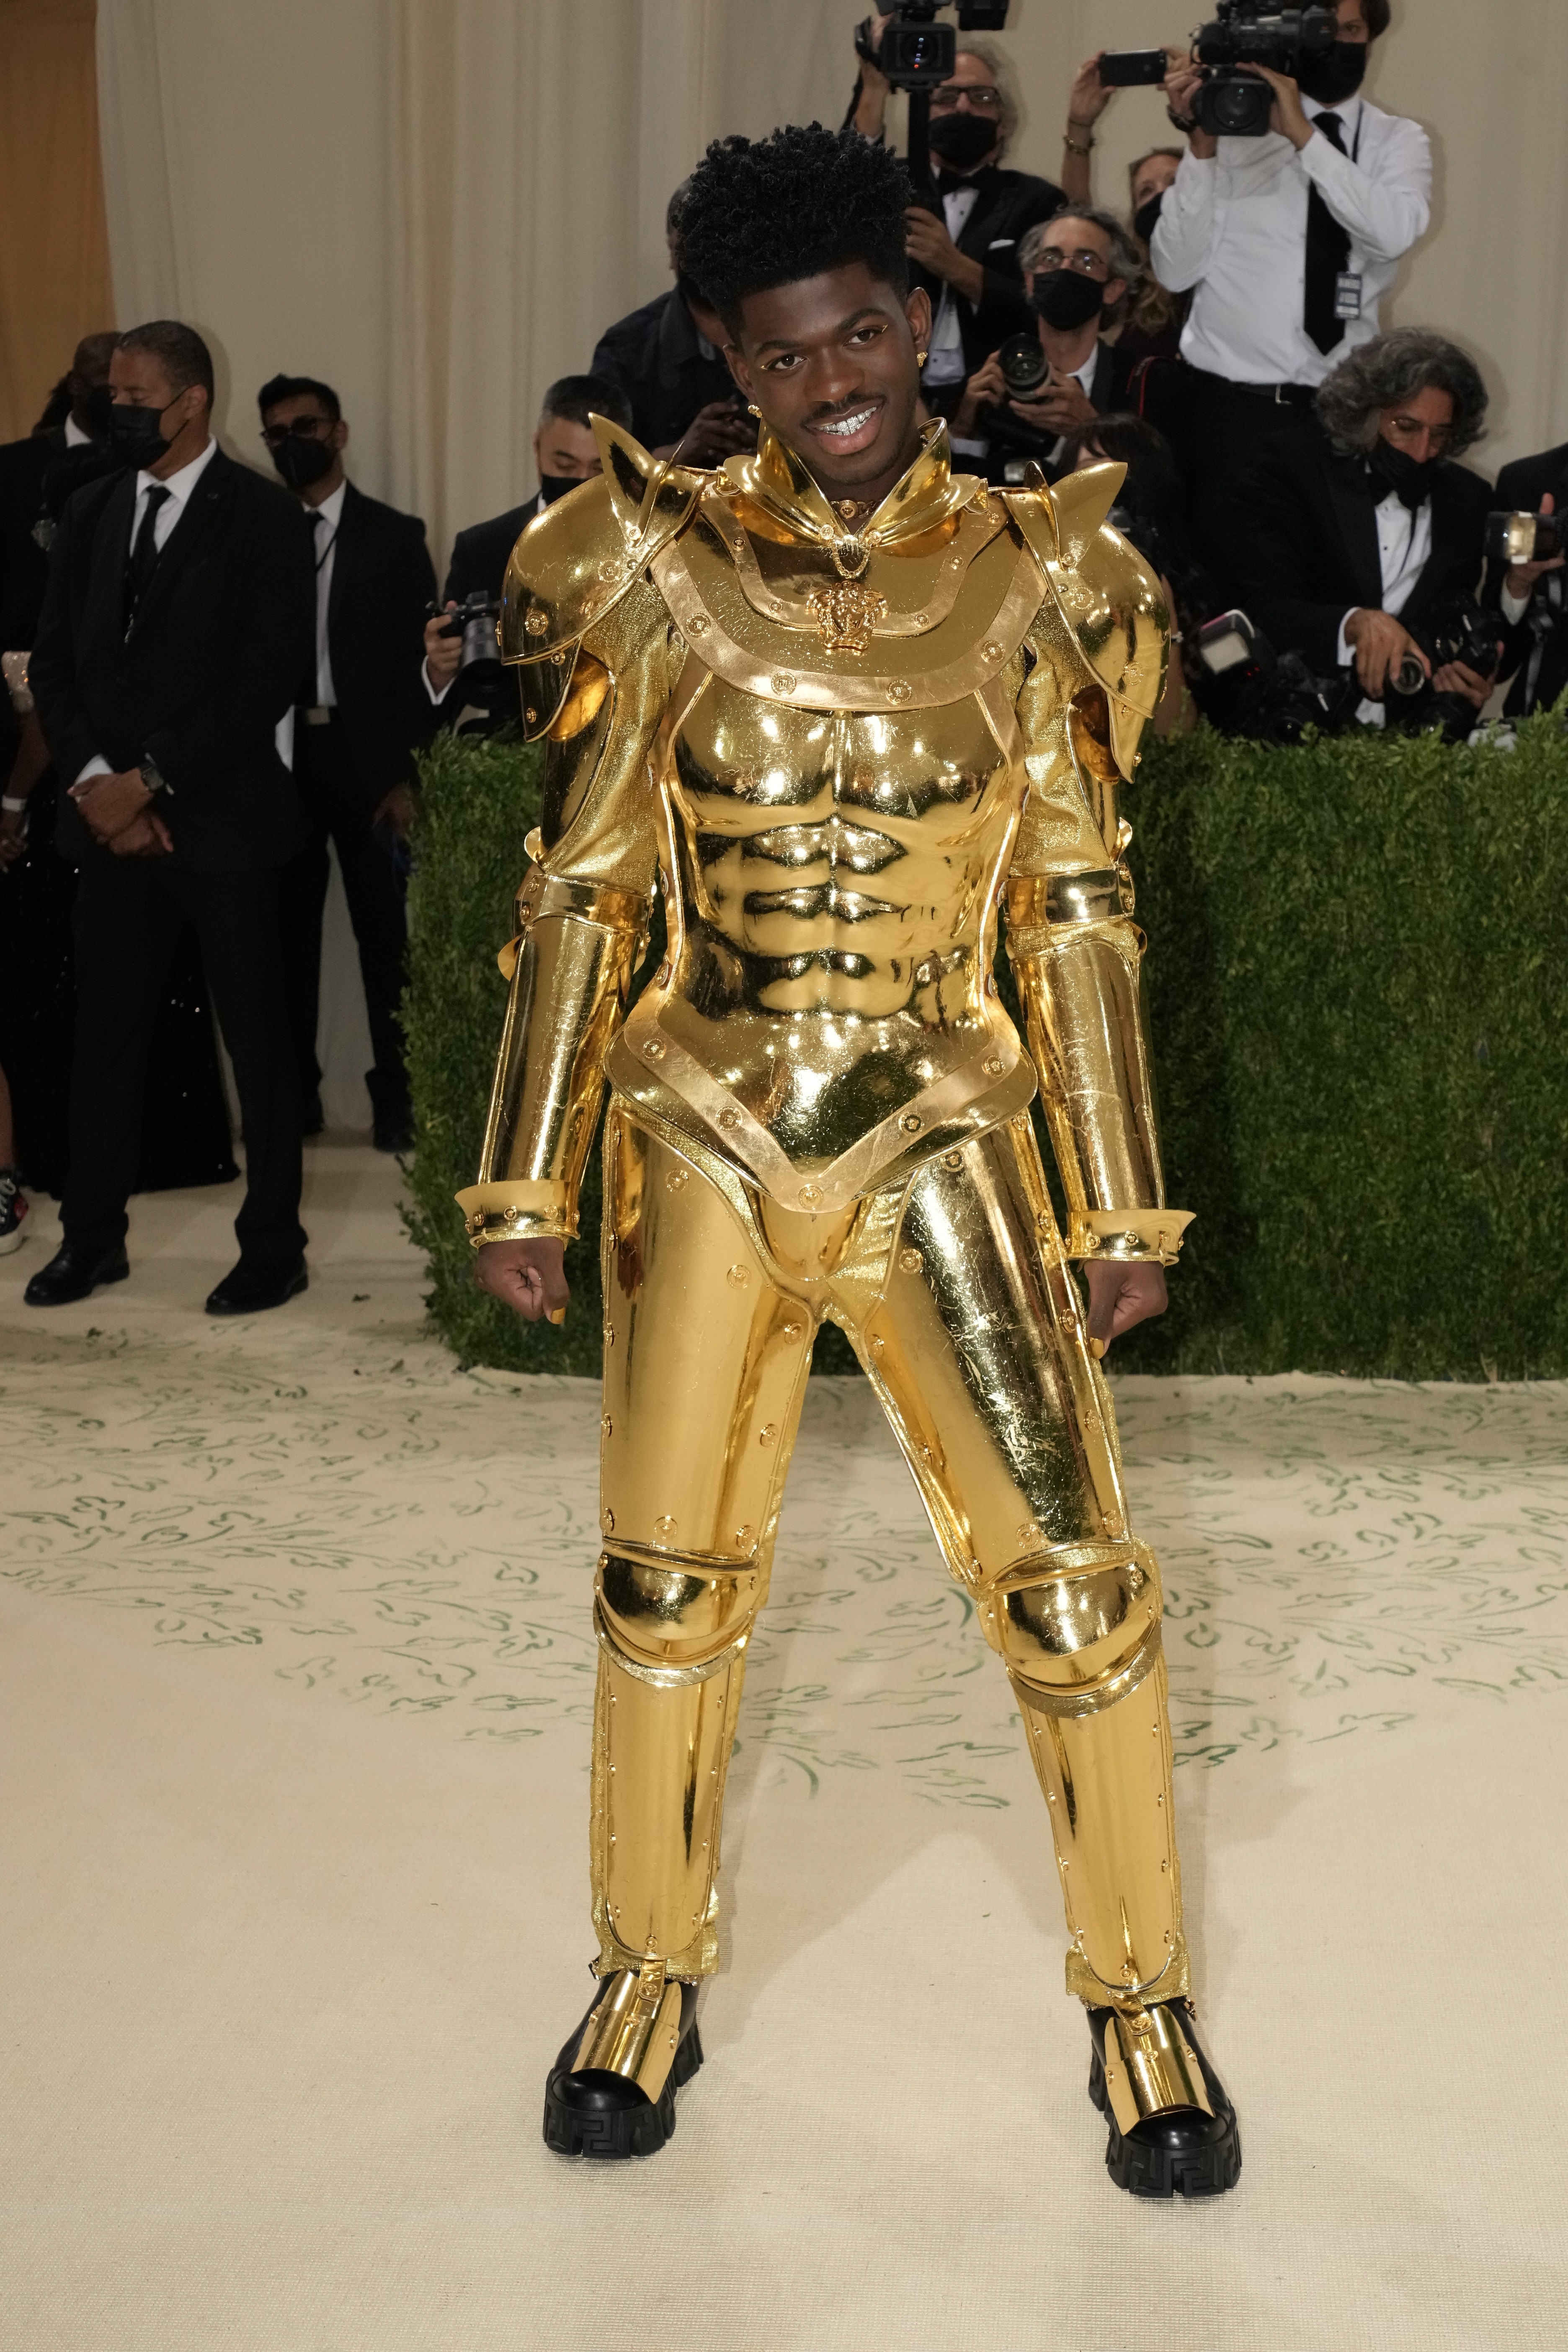 NEW YORK, NEW YORK - SEPTEMBER 13: Lil Nas X attends The 2021 Met Gala Celebrating In America: A Lexicon Of Fashion at Metropolitan Museum of Art on September 13, 2021 in New York City. (Photo by Jeff Kravitz/FilmMagic) (Foto: FilmMagic)